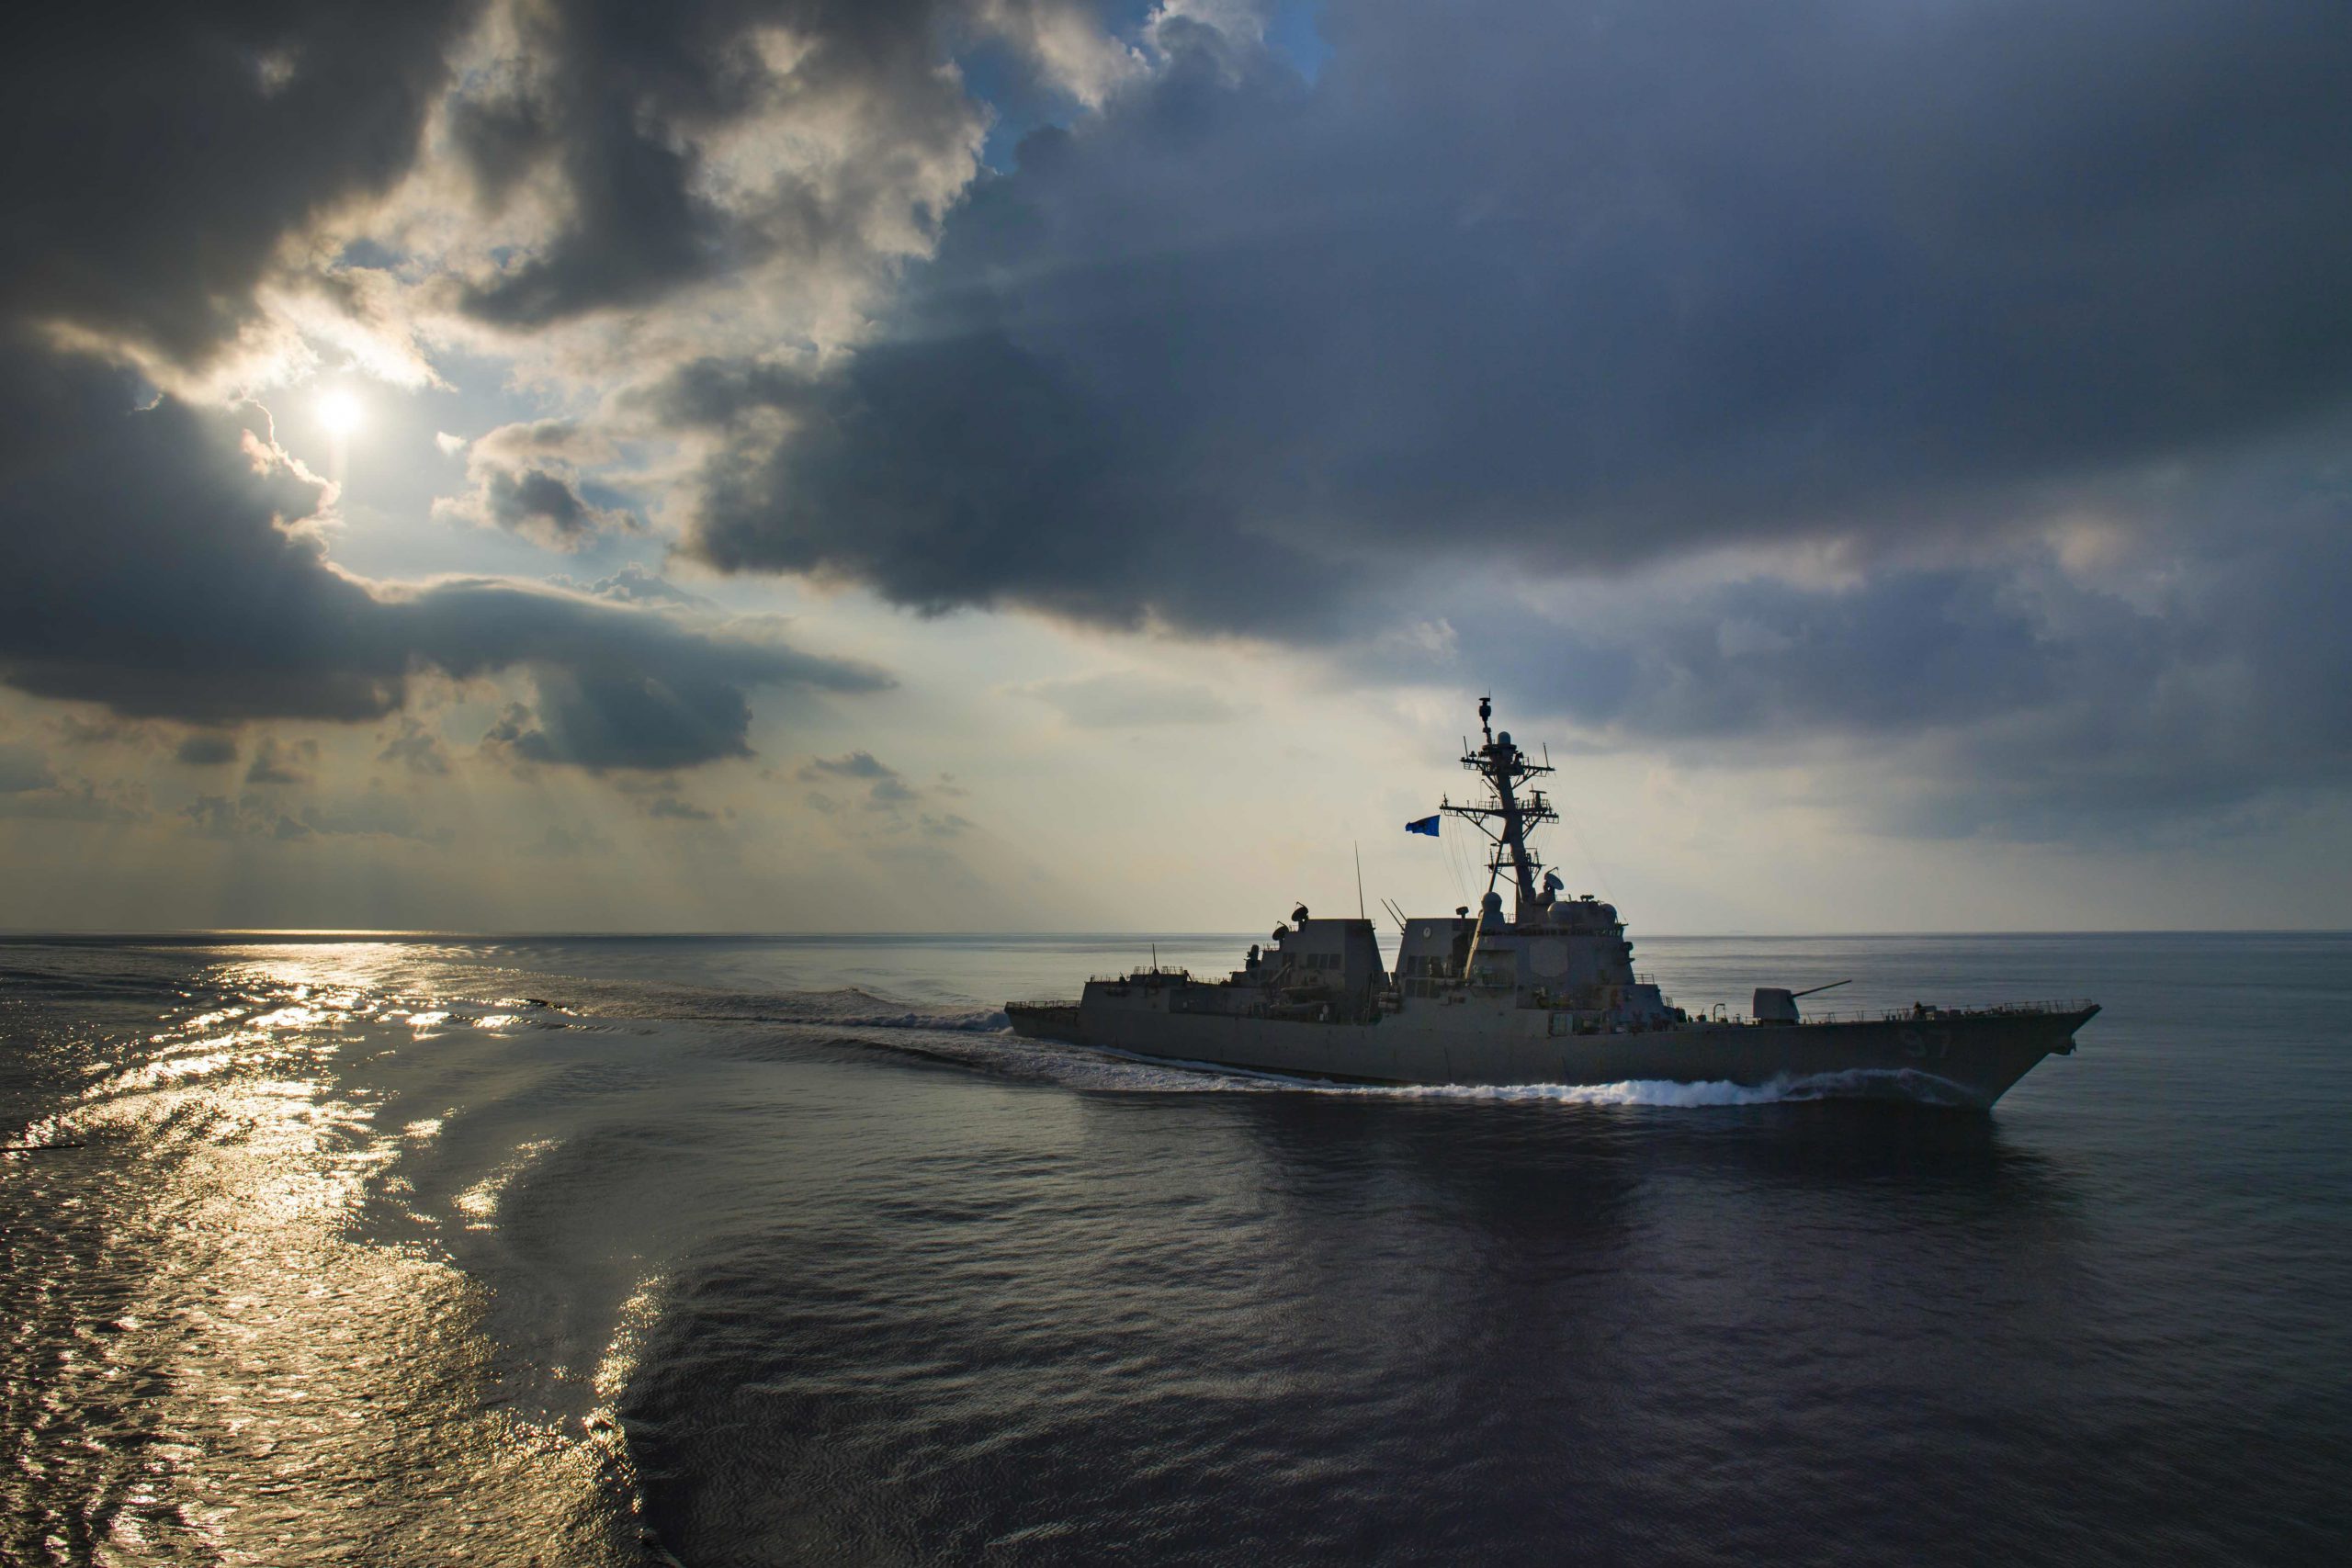 The guided-missile destroyer USS Halsey transits the Indian Ocean, March 28, 2018. The Halsey is among other U.S. Navy vessels and Thai Royal Navy ships participating in the Guardian Sea exercise. Navy photo by Petty Officer 3rd Class Morgan K. Nall. -